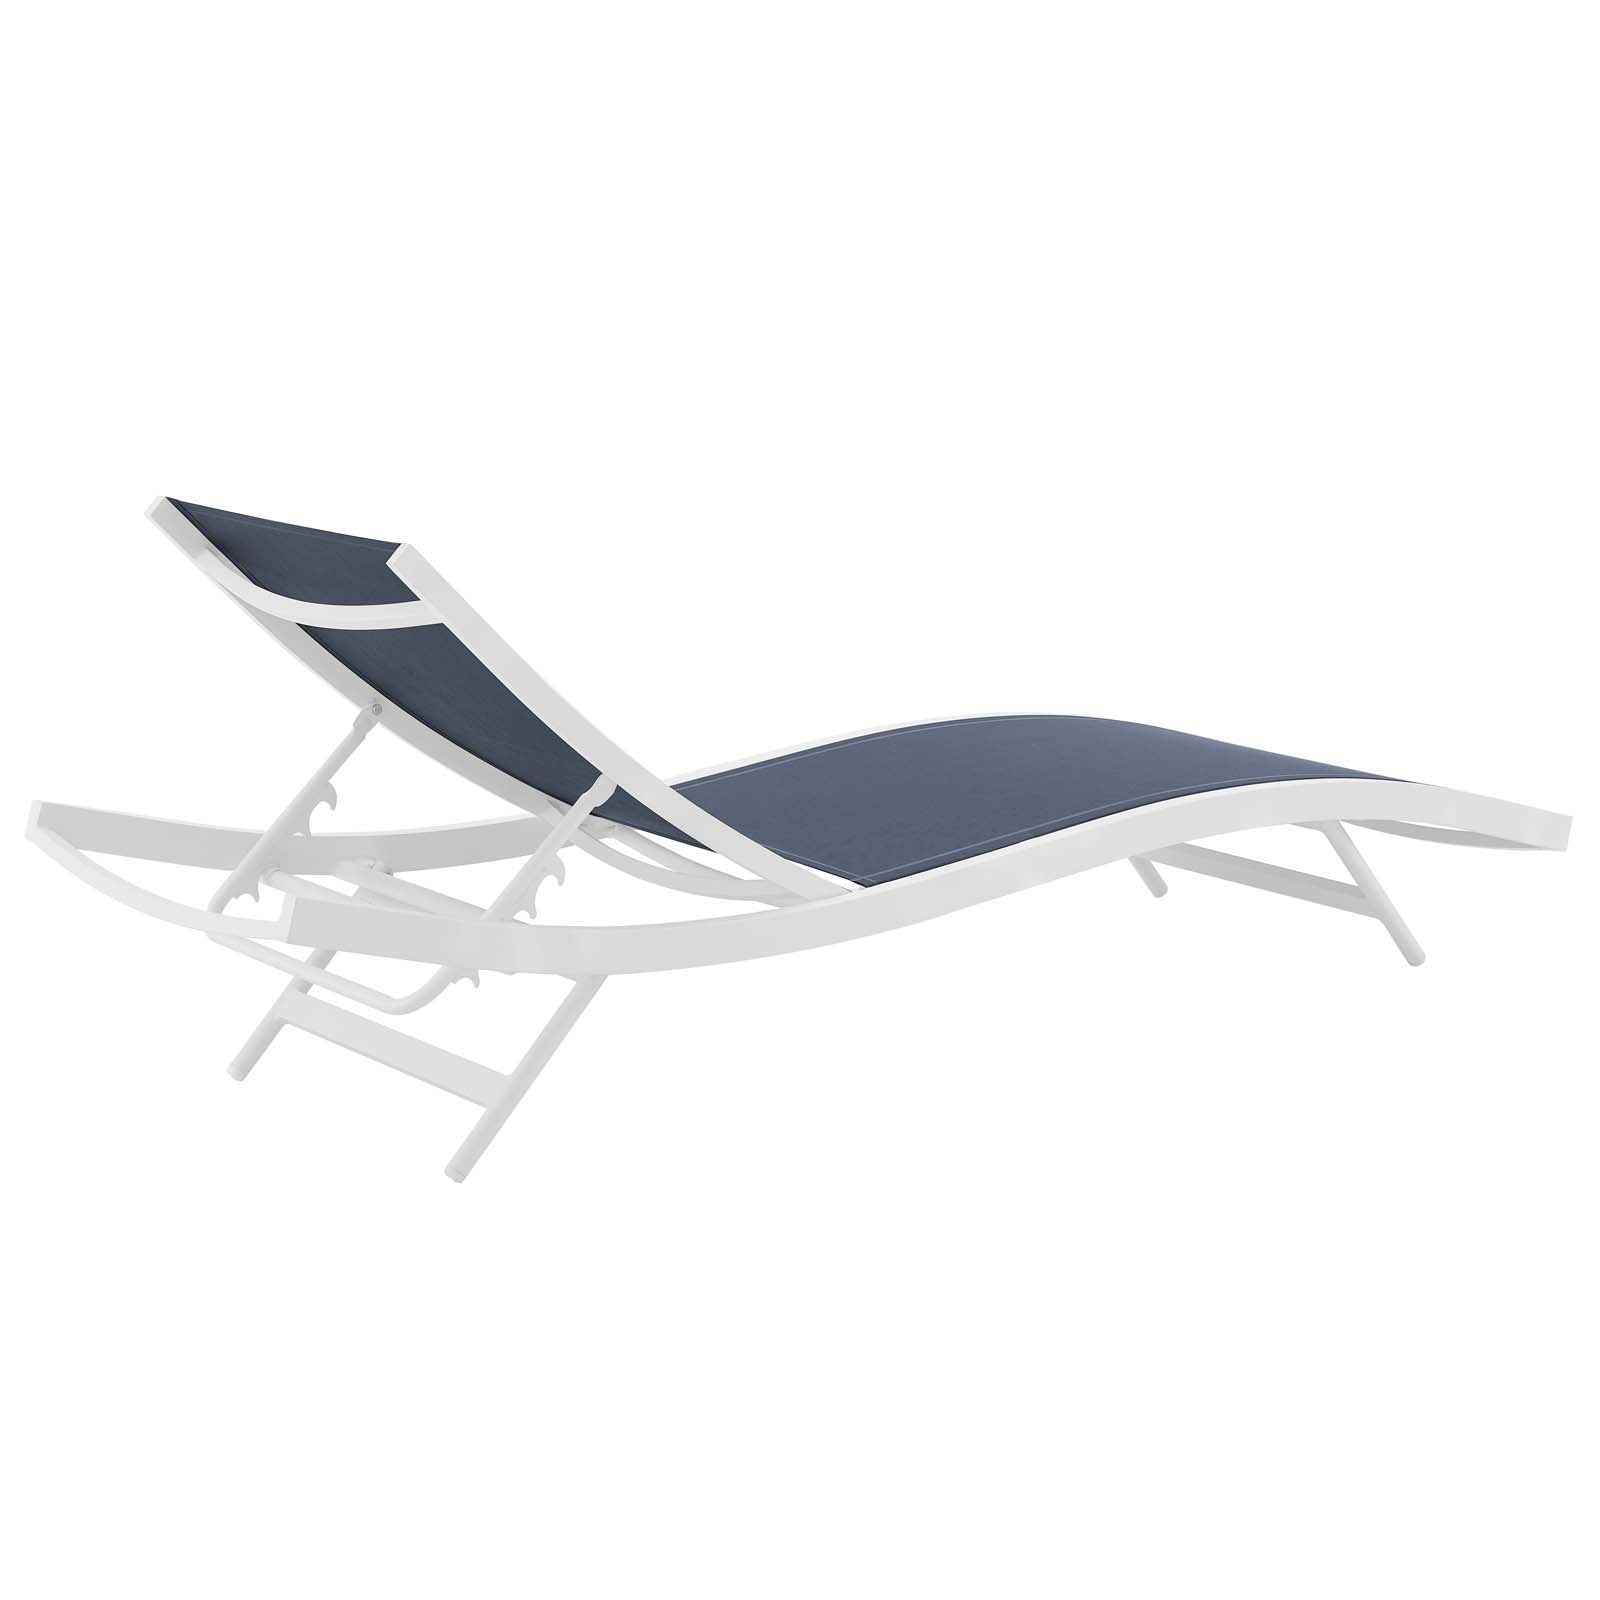 Glimpse Outdoor Patio Mesh Chaise Lounge Set of 4 - East Shore Modern Home Furnishings